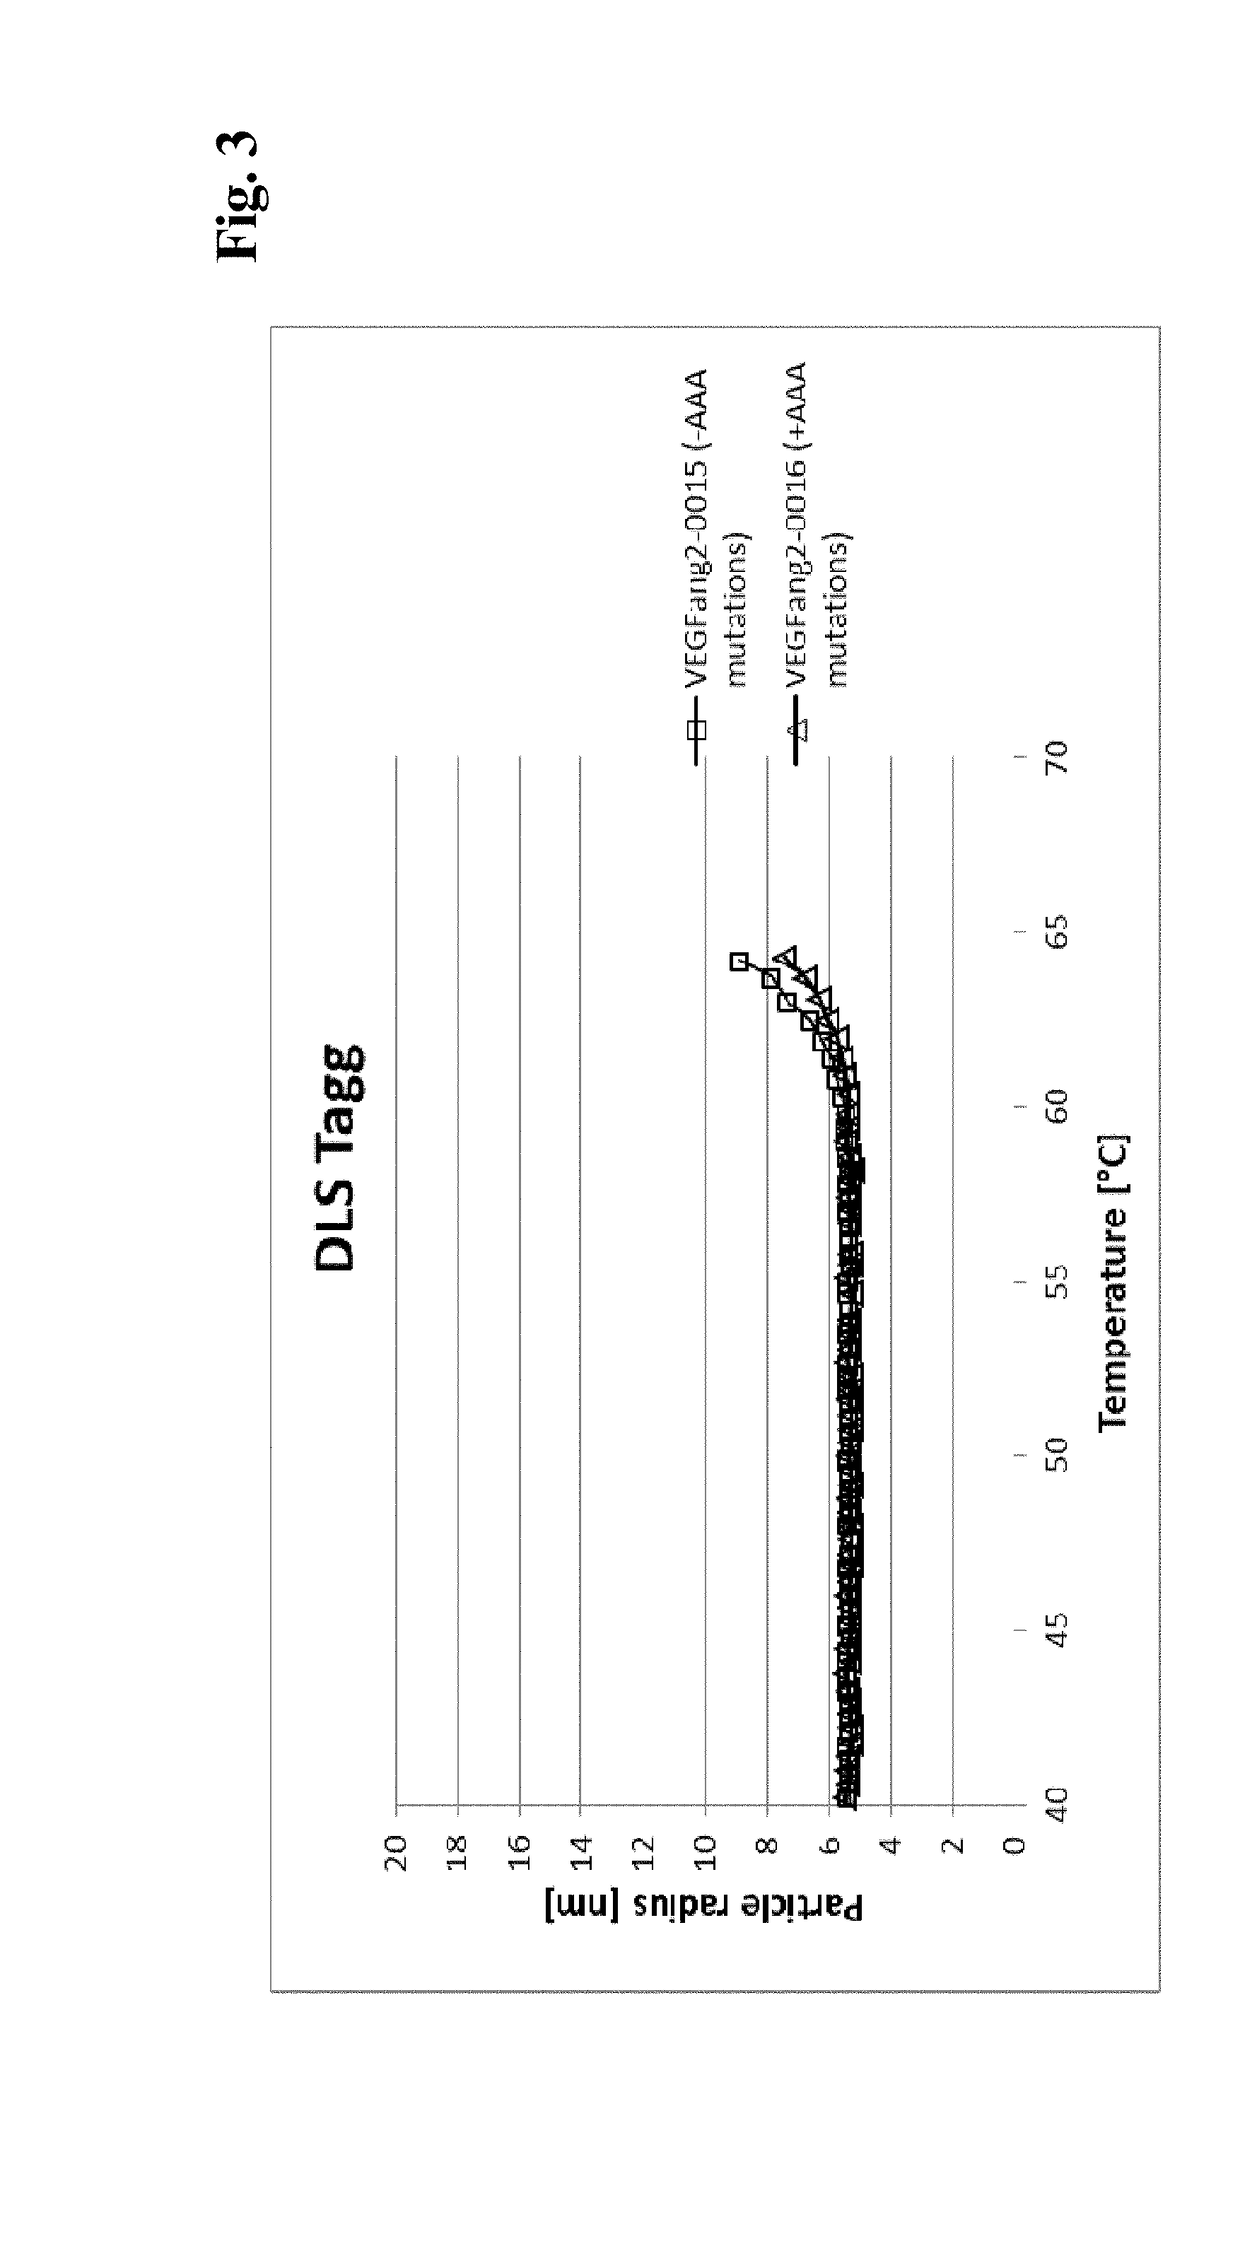 Bispecific anti-VEGF/anti-ANG-2 antibodies and their use in the treatment of ocular vascular diseases